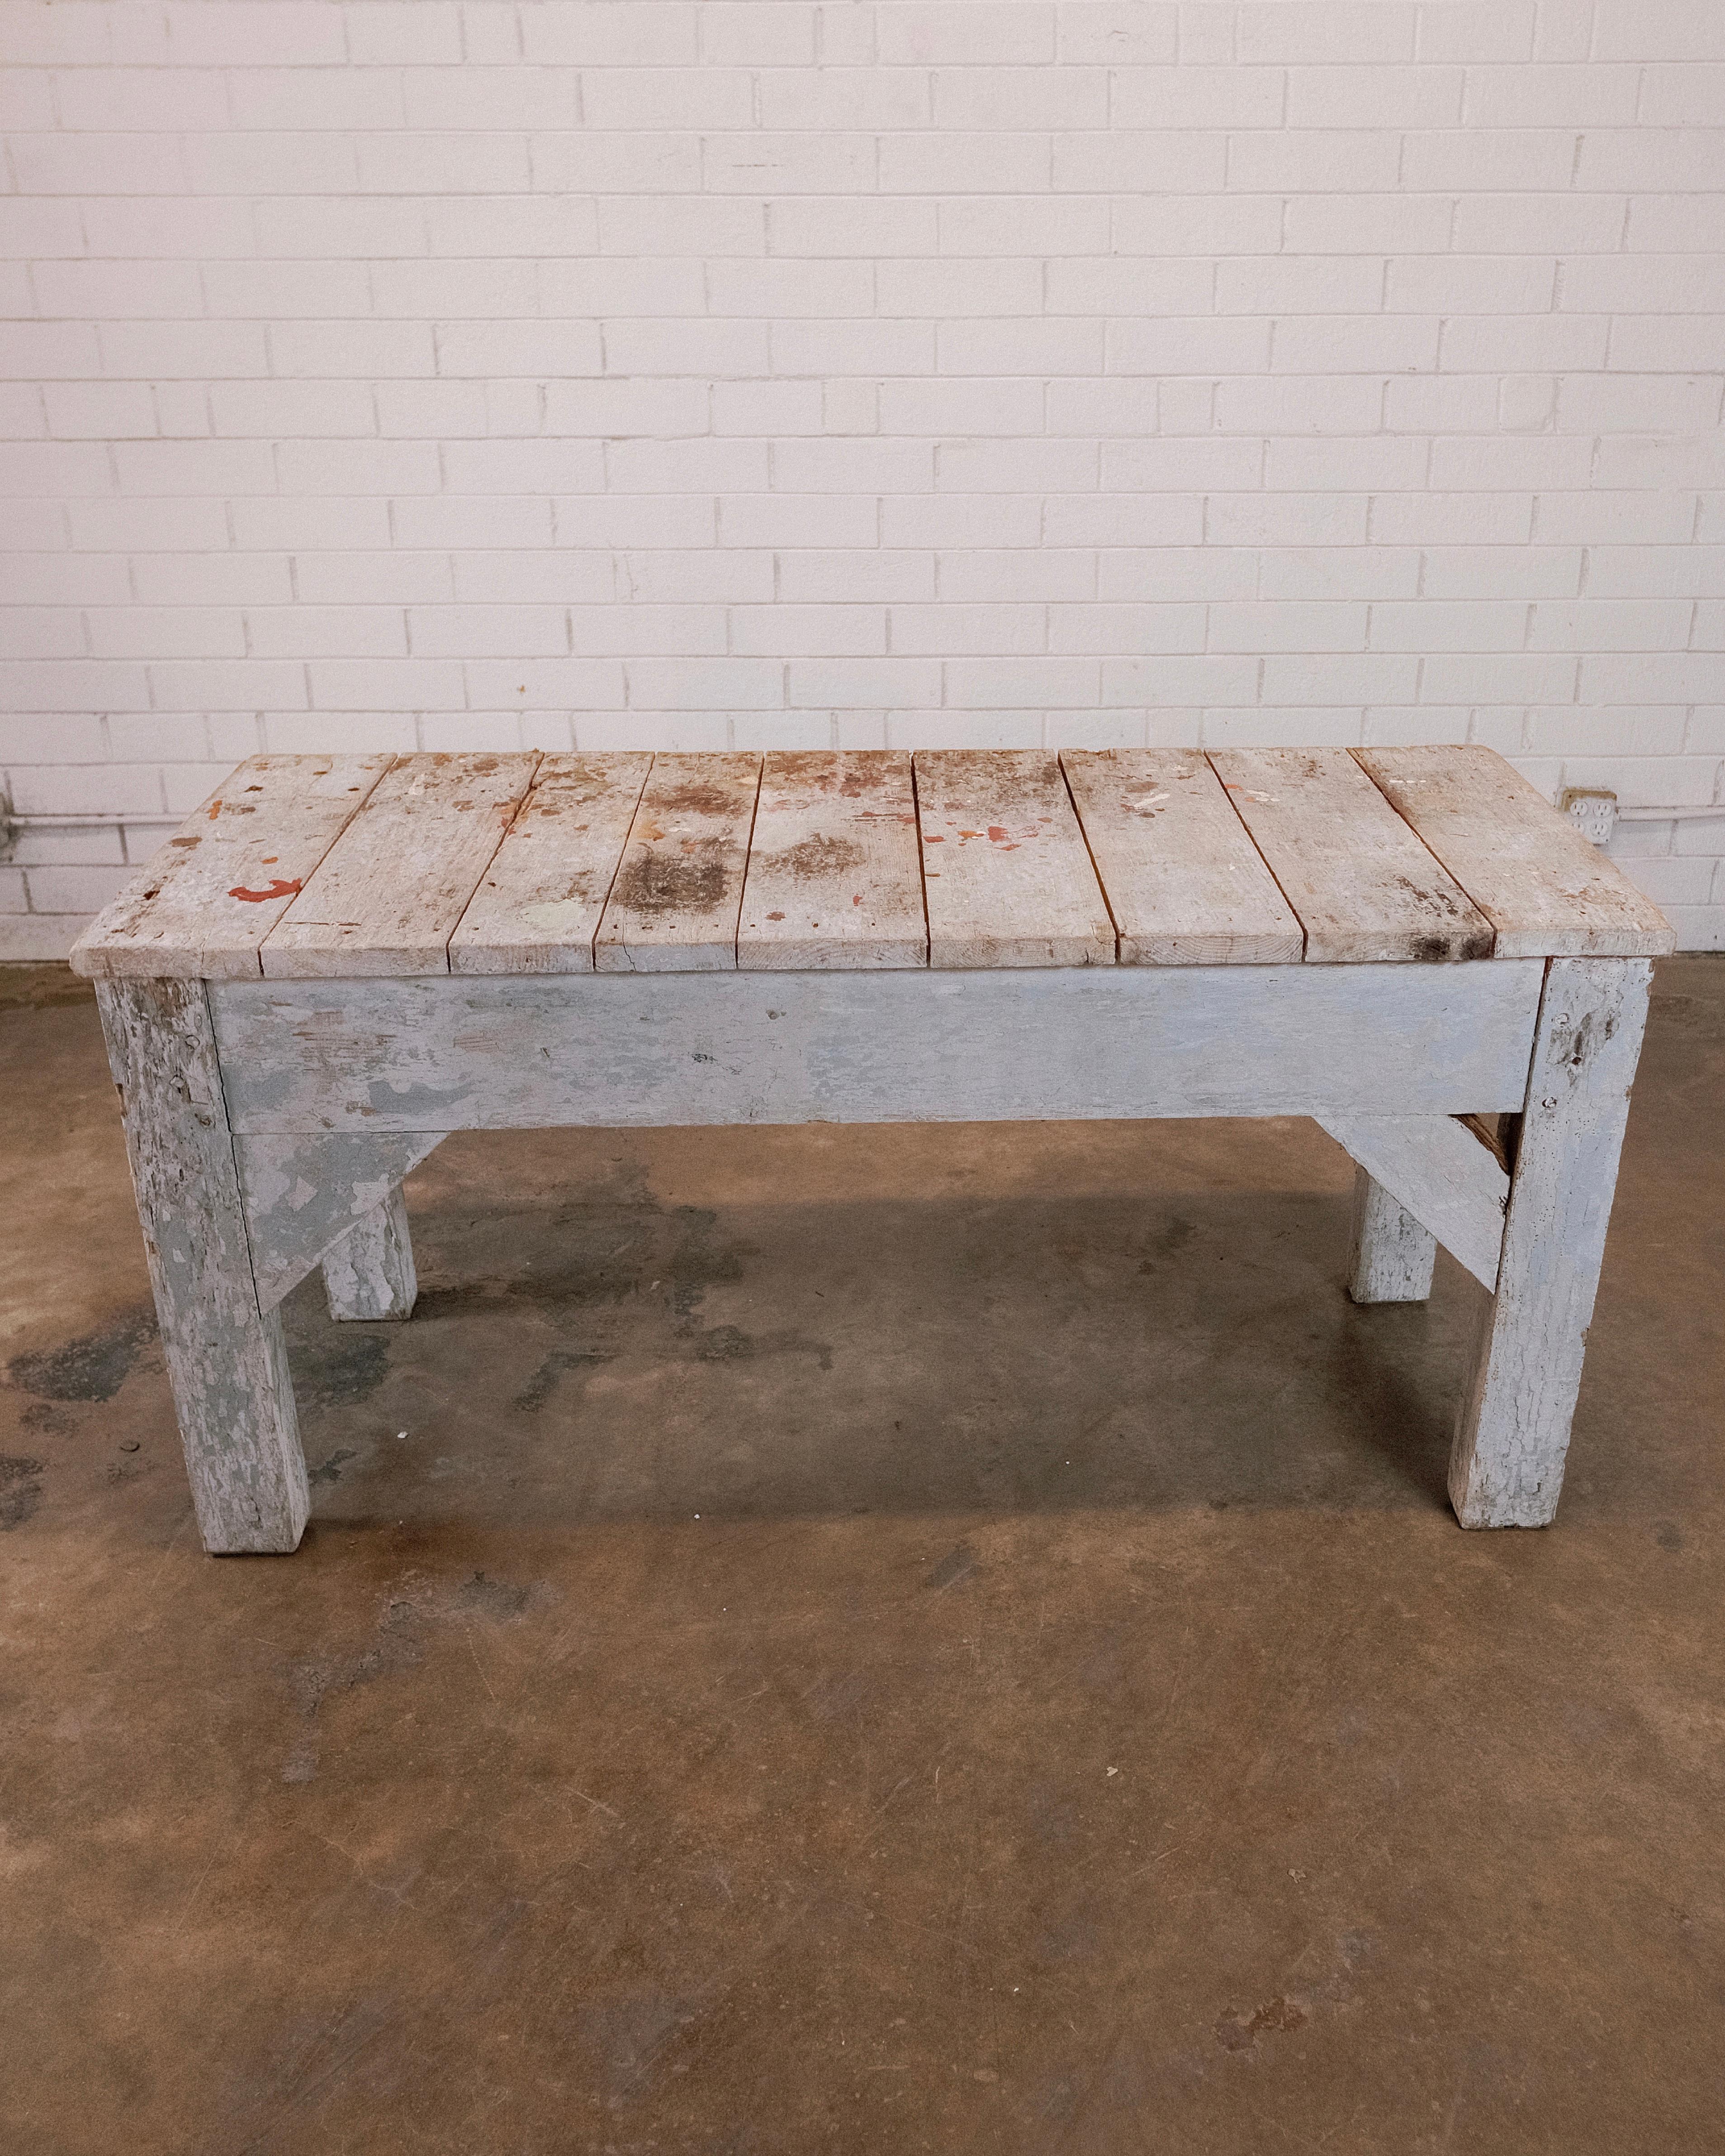 Primitive Painted Blue Workshop Table In Good Condition For Sale In High Point, NC